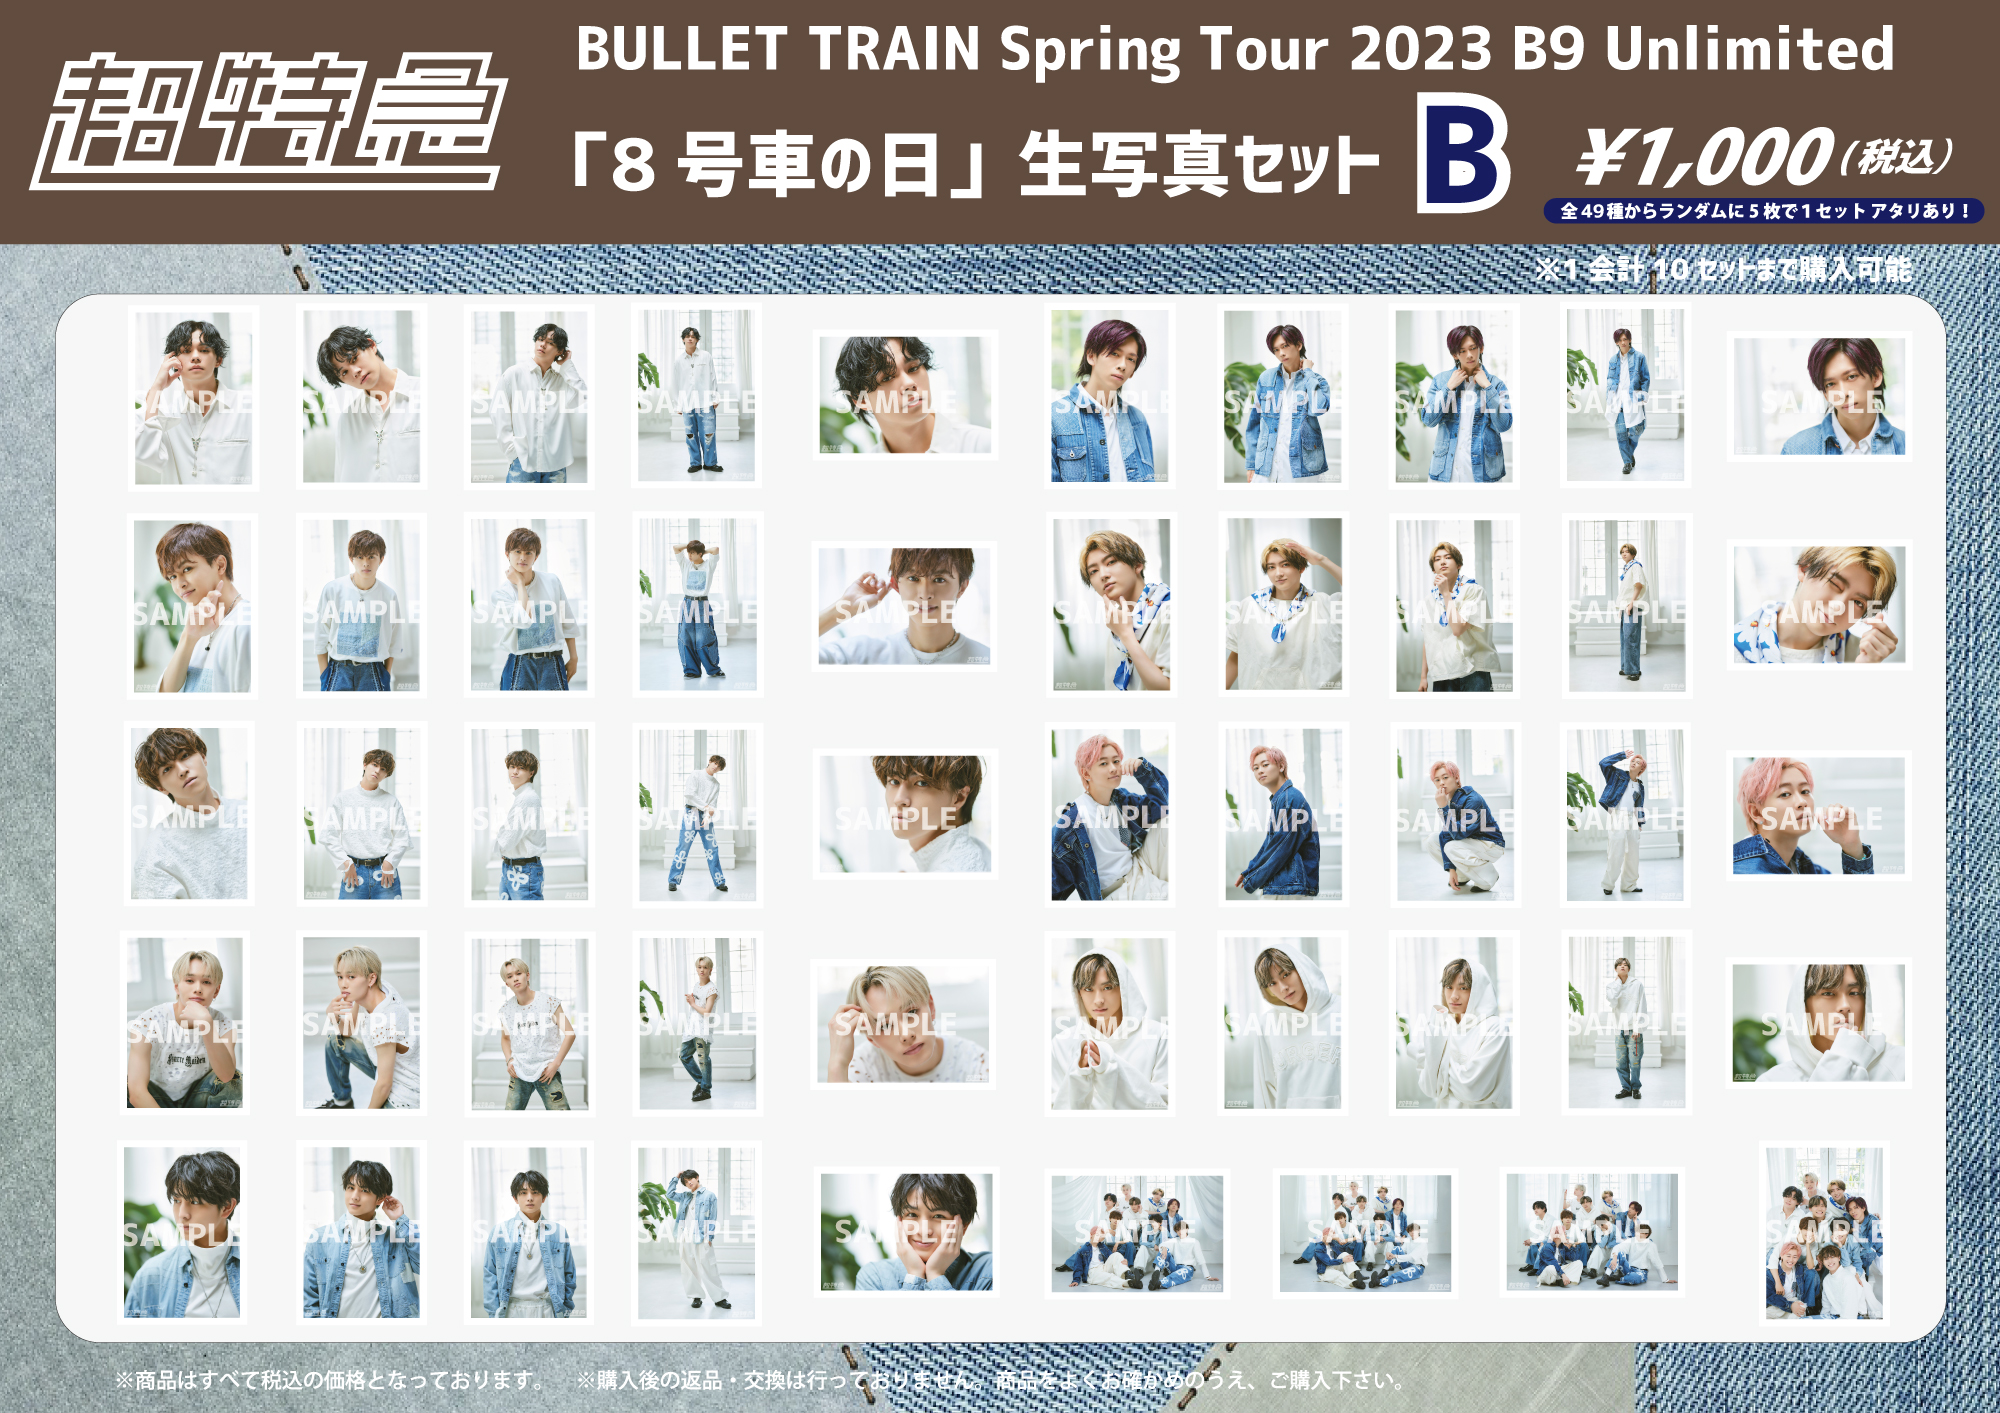 BULLET TRAIN Spring Tour 2023「B9 Unlimited」8号車の日 会場